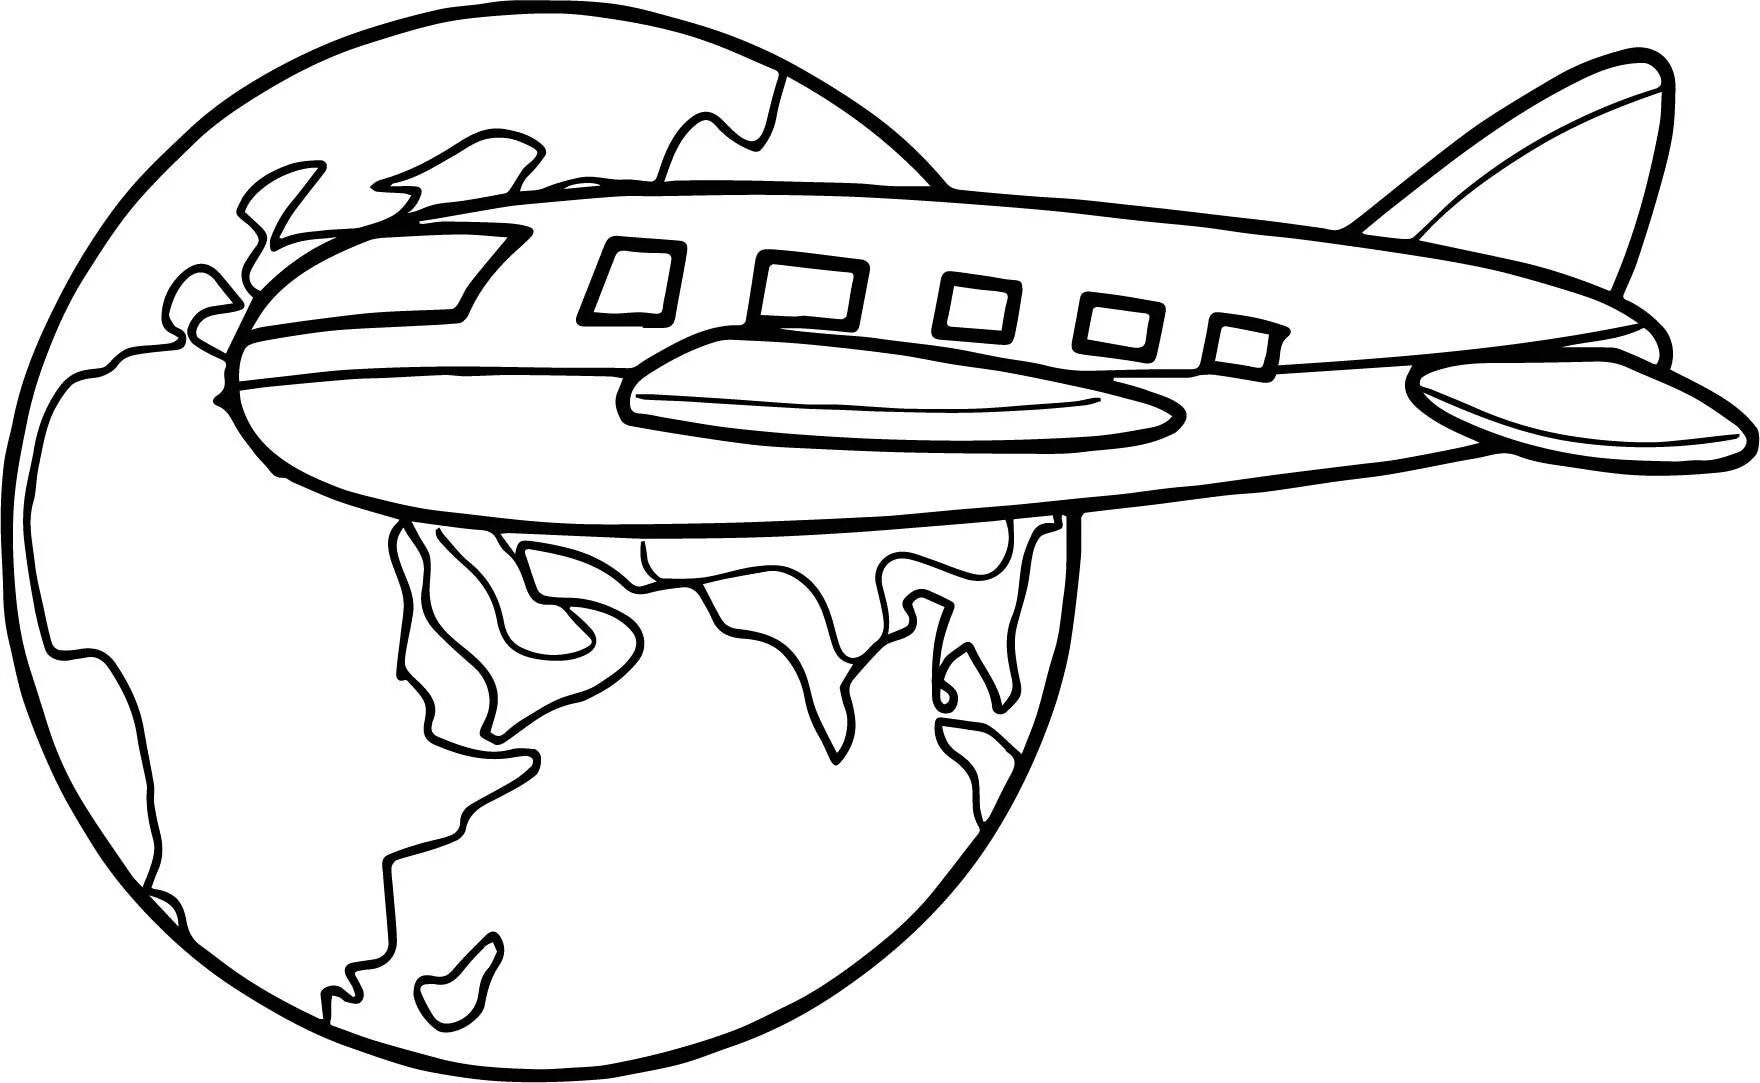 Playful travel coloring page for kids